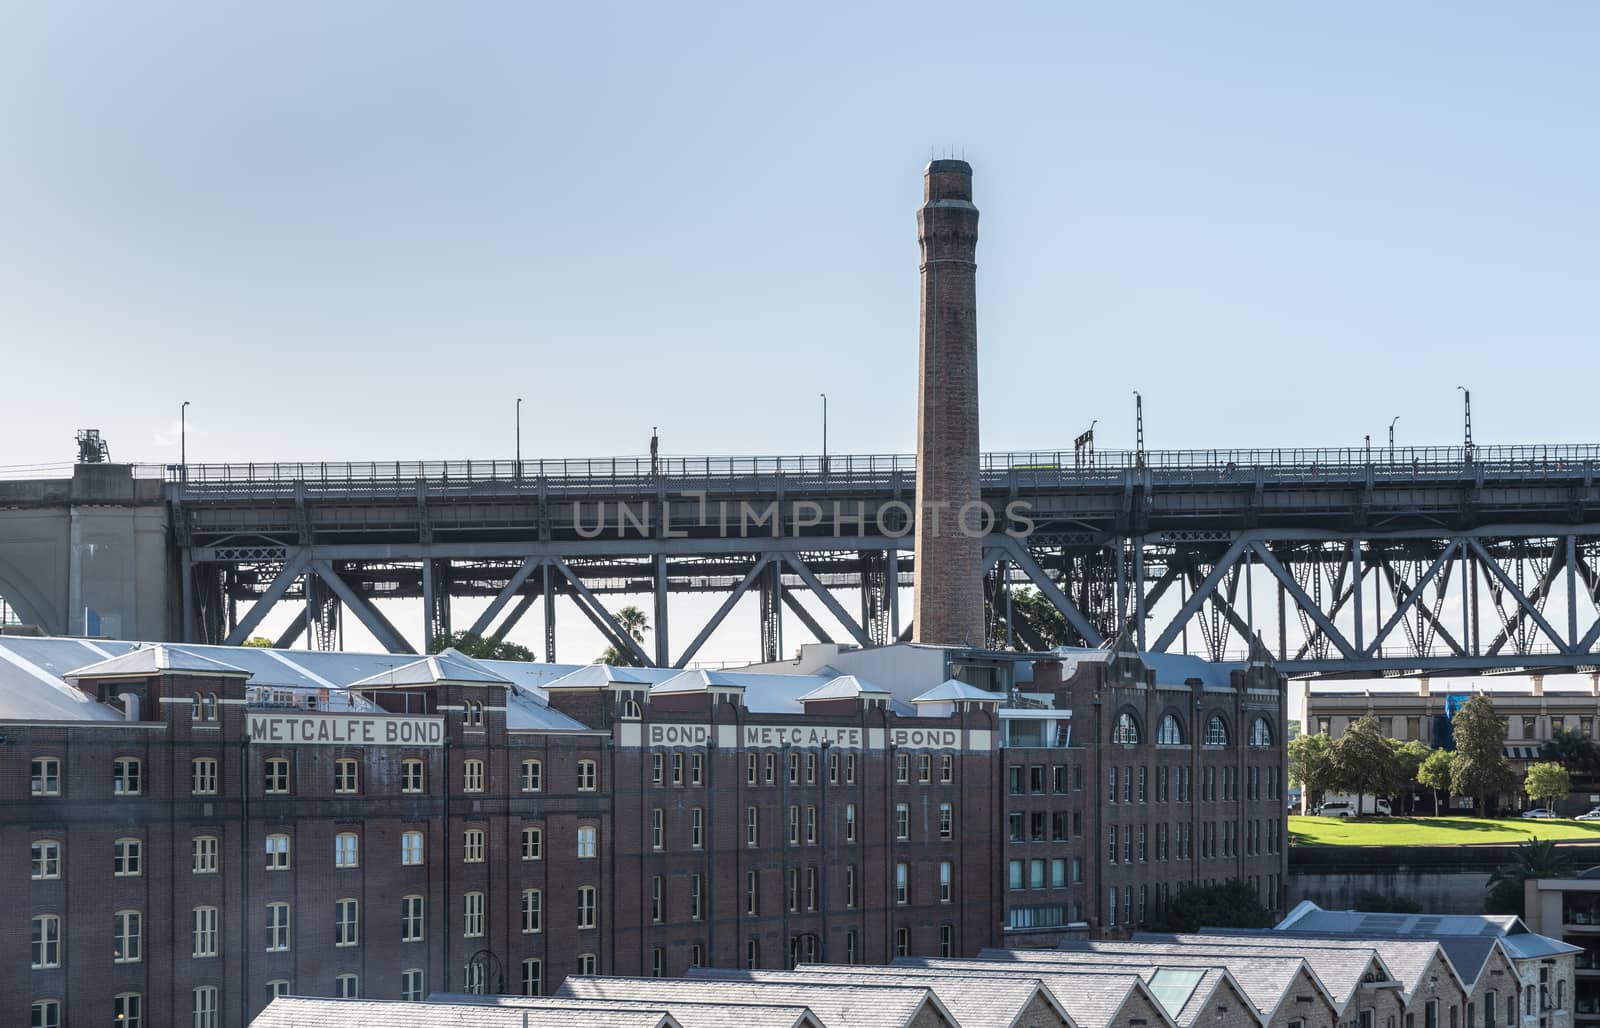 Sydney, Australia - February 12, 2019: Historic harbor warehouses with tall chimney sports Metcalfe Bond advertisement on facade. At foot of Harbour bridge.